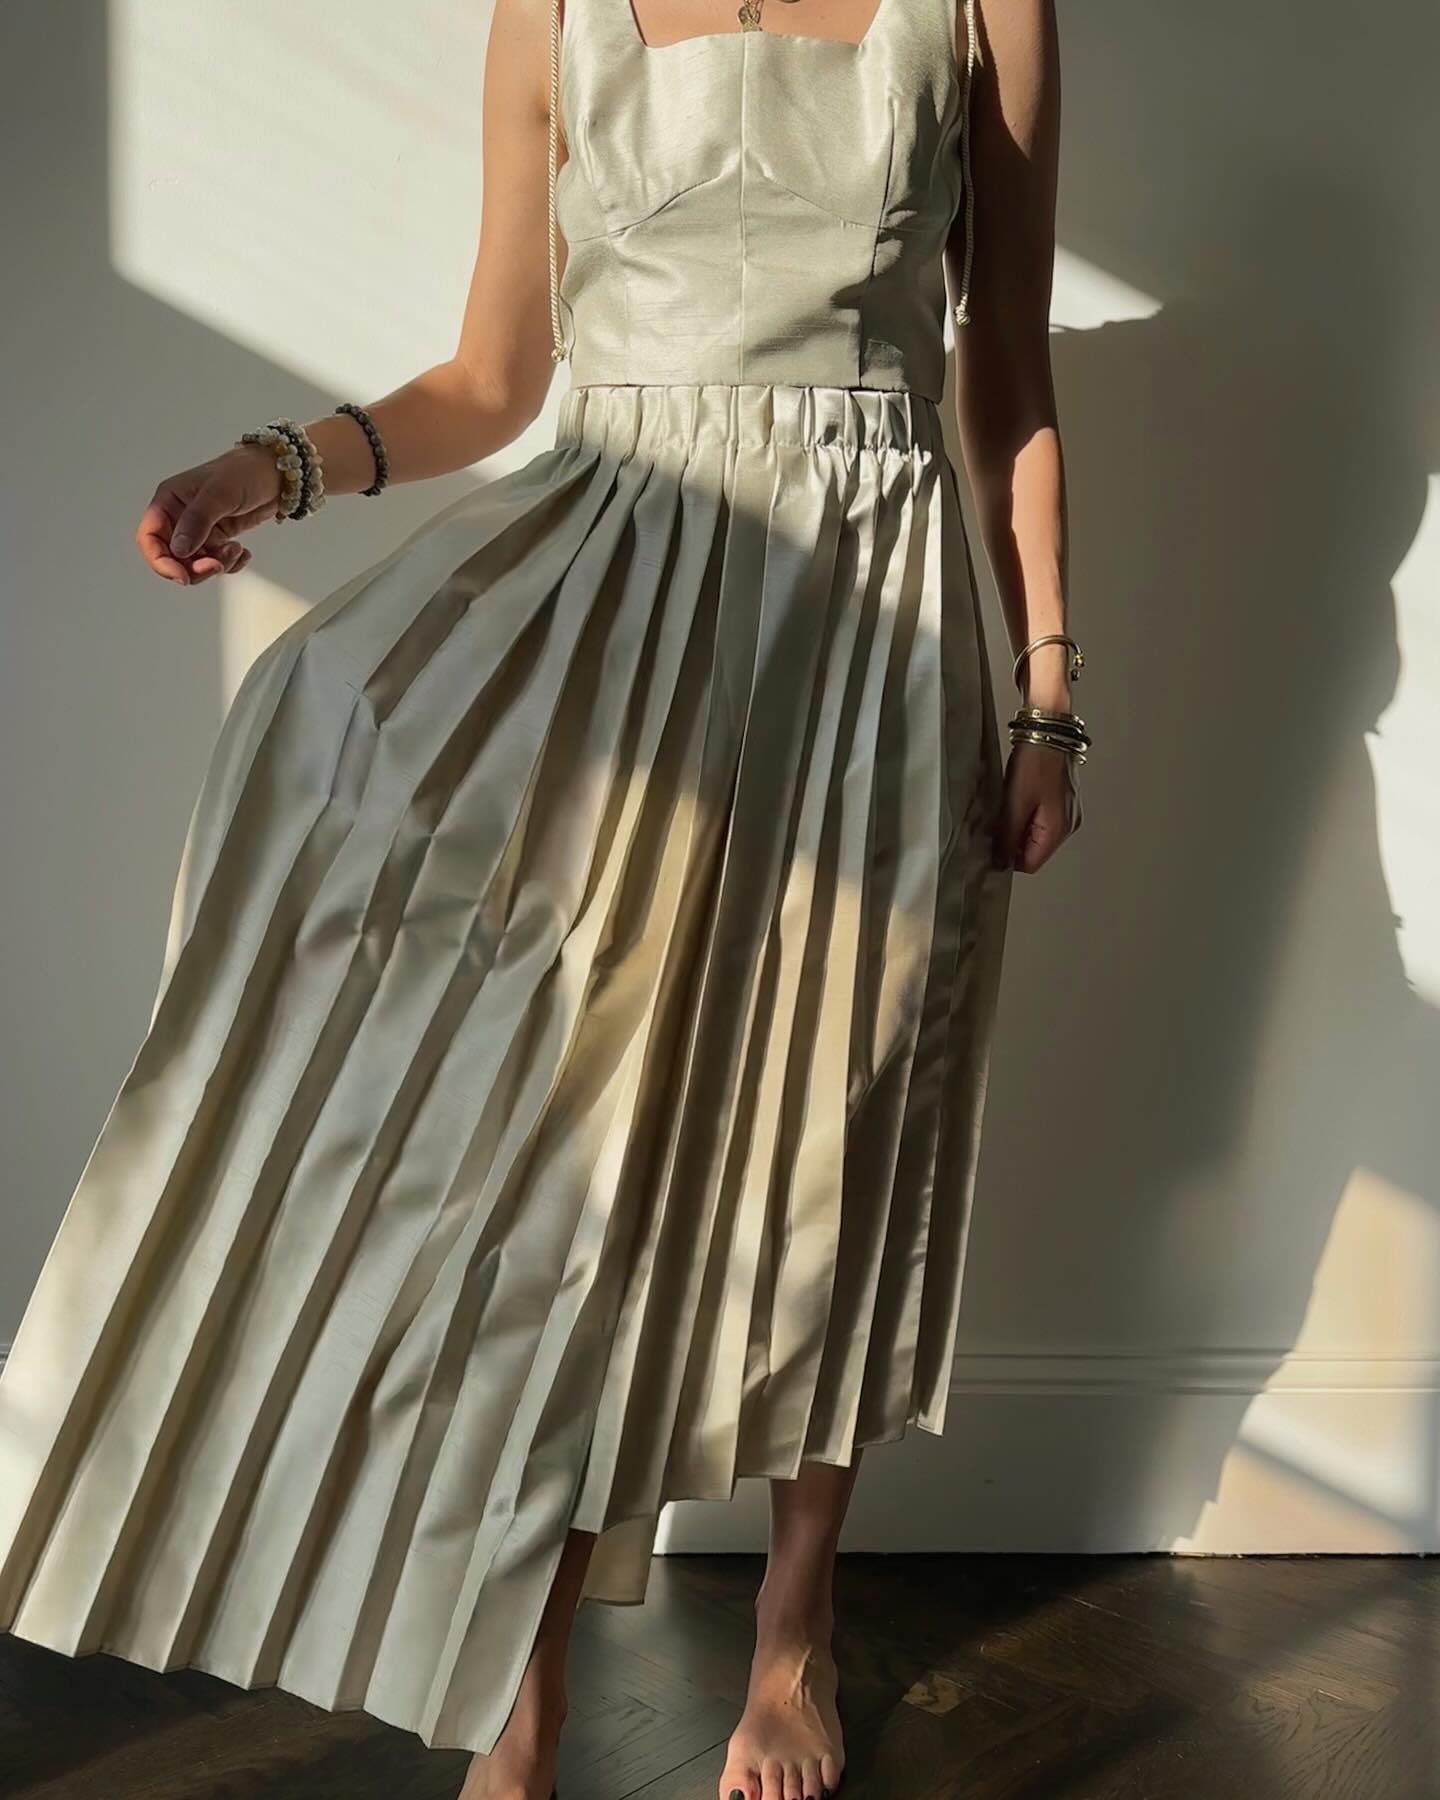 The Plume Skirt in Pearl 🦪⚪️✨ &hellip; This pleated skirt is a dream; the long panel is matte while the shorter panel is shiny both with the same pearlescent color. It moves with beauty combining both knife and box pleating, which allows the fabric 